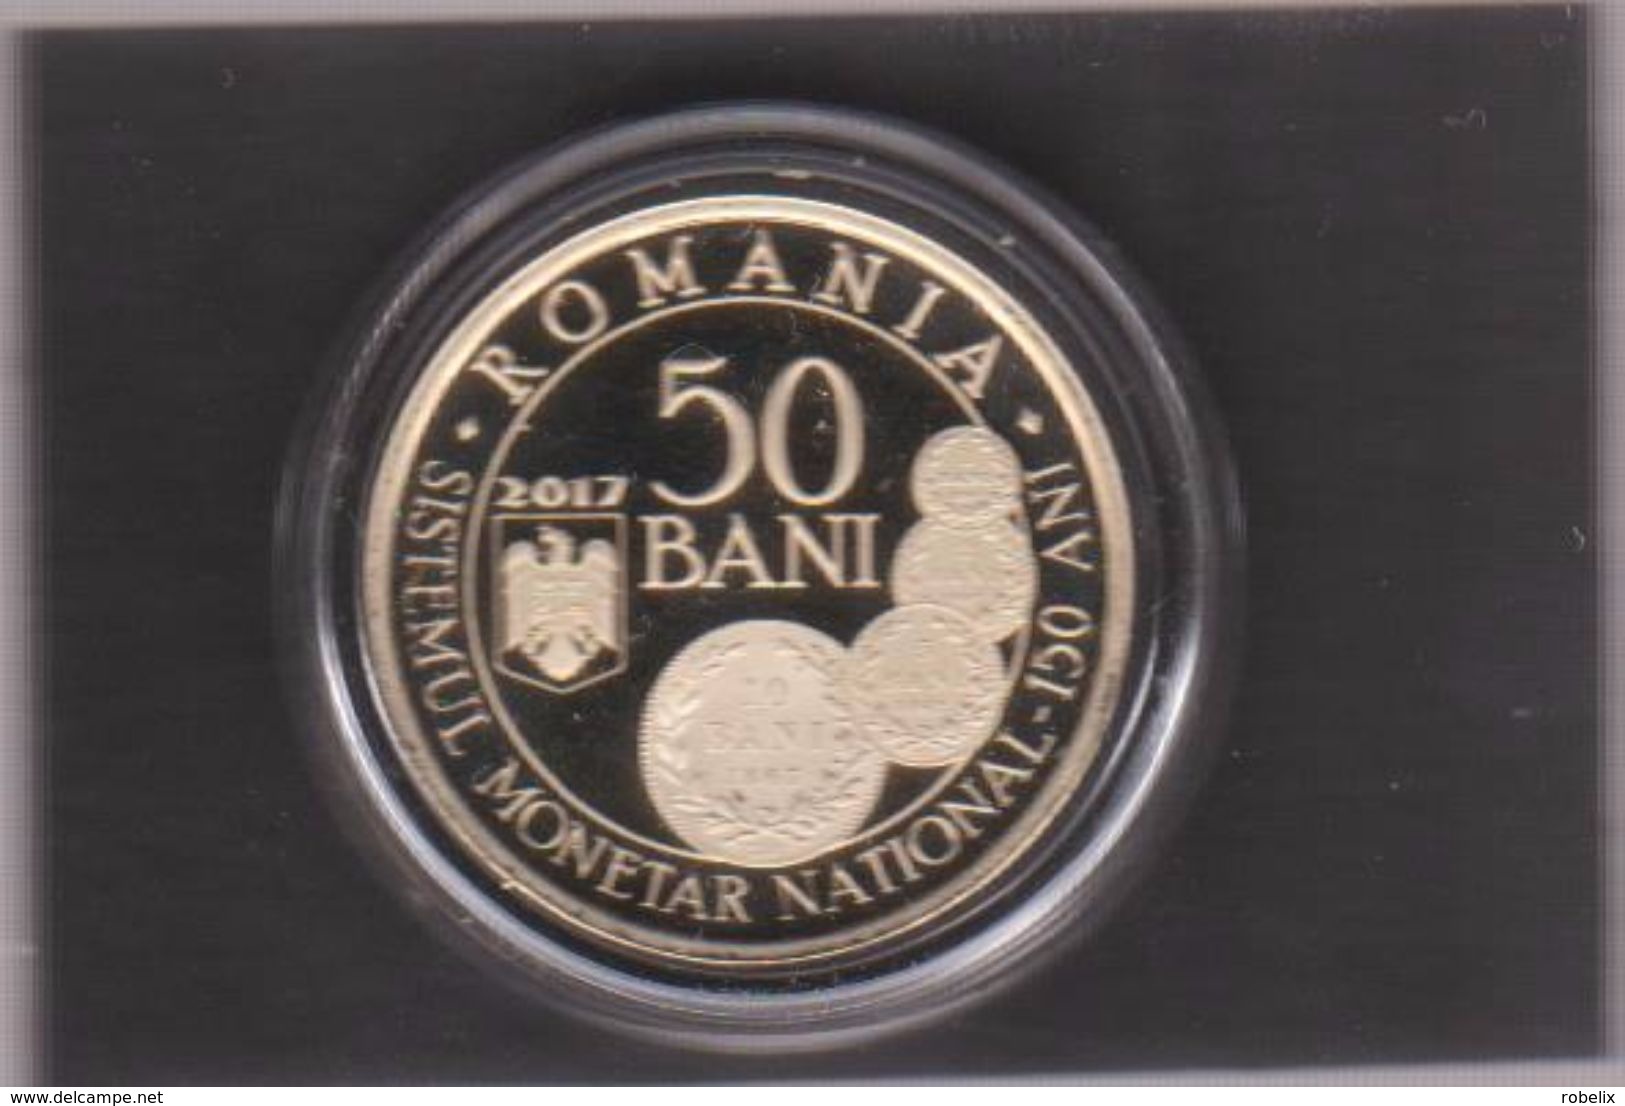 ROMANIA -2017-  50 BANI COMMEMORATIVE COINS-150 Years - A New Monetary System  -Proof  (Rare)-for Collectors(2 Scans) - Romania